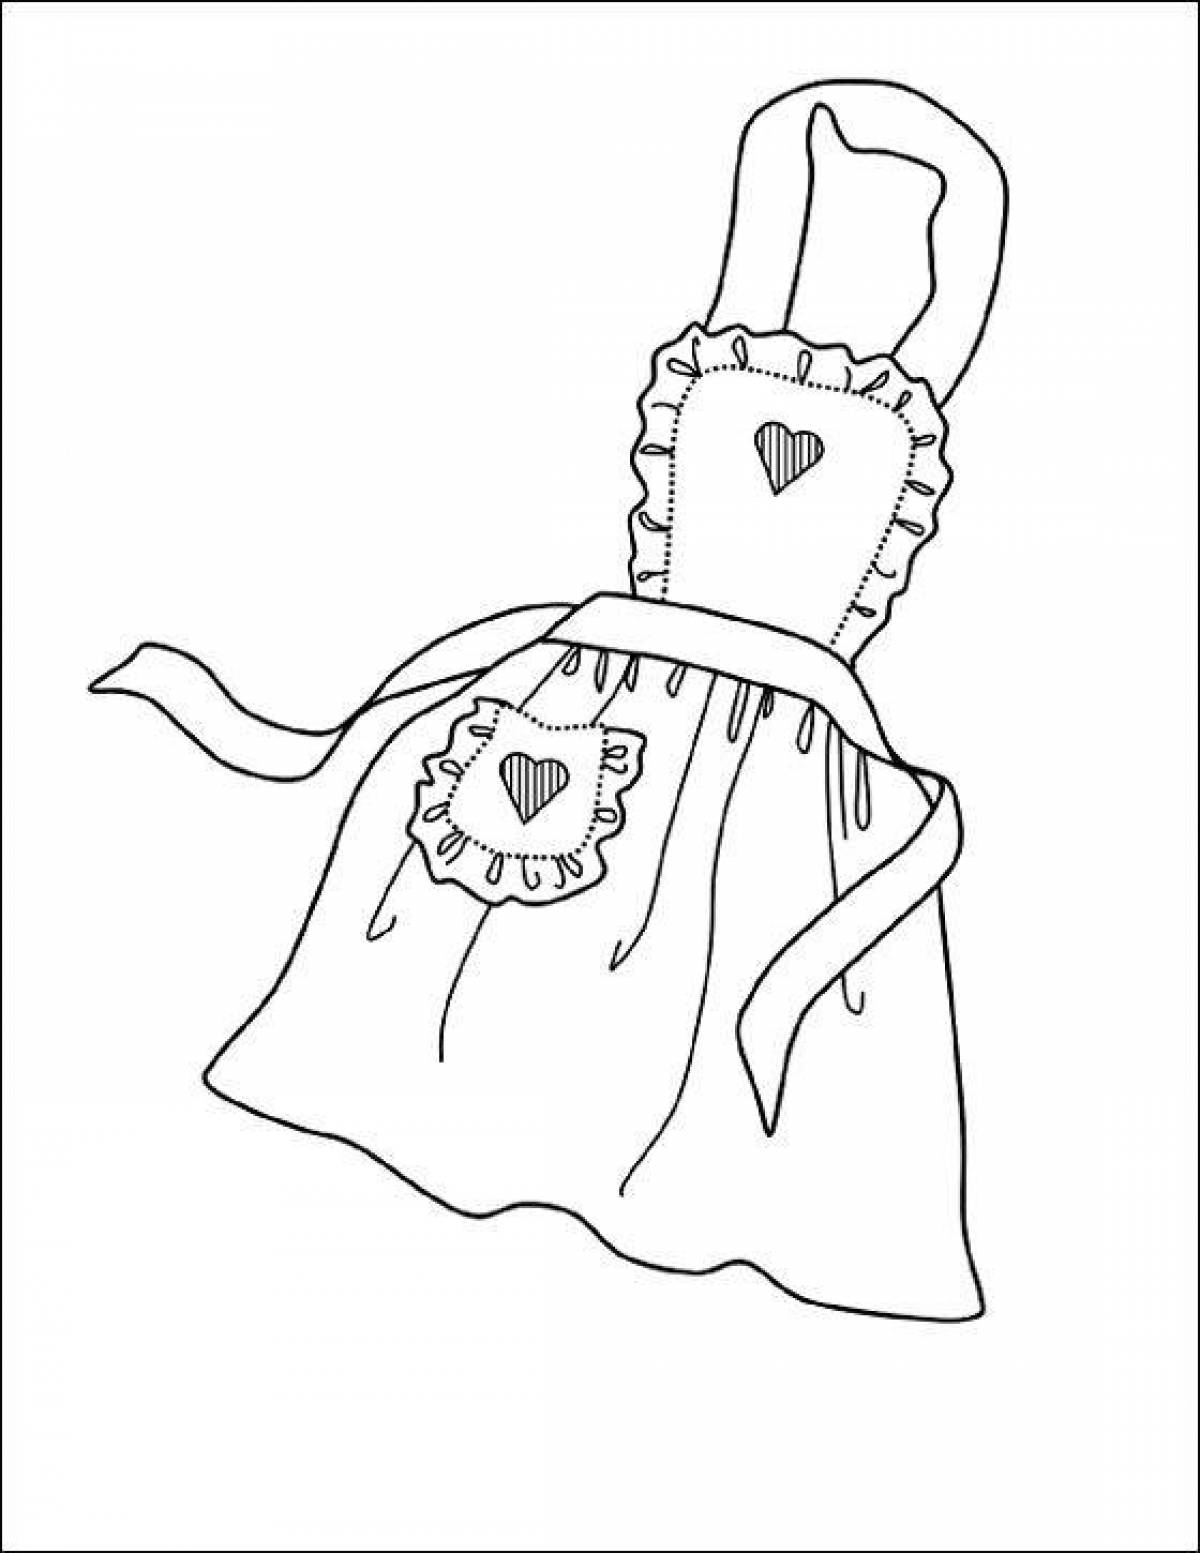 Coloring page sweet apron